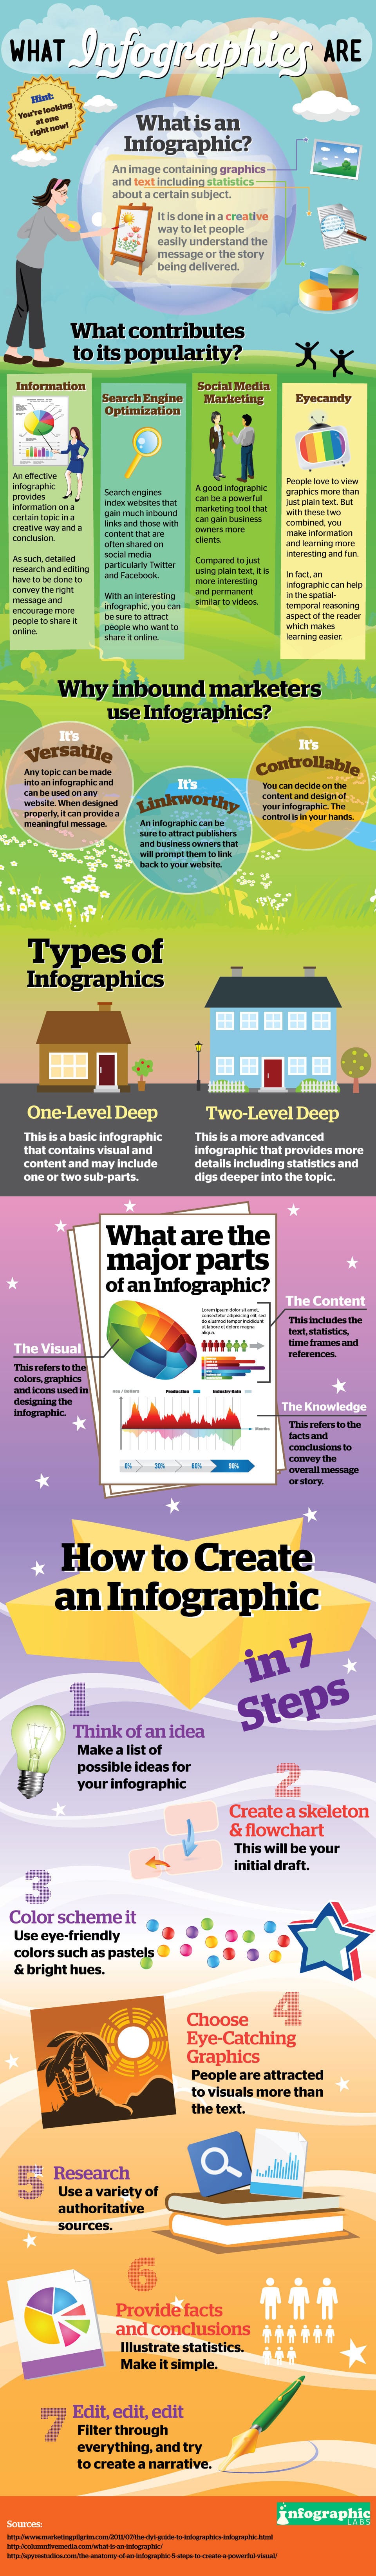 How To Create Your Own Infographic In 7 Steps [Infographic]